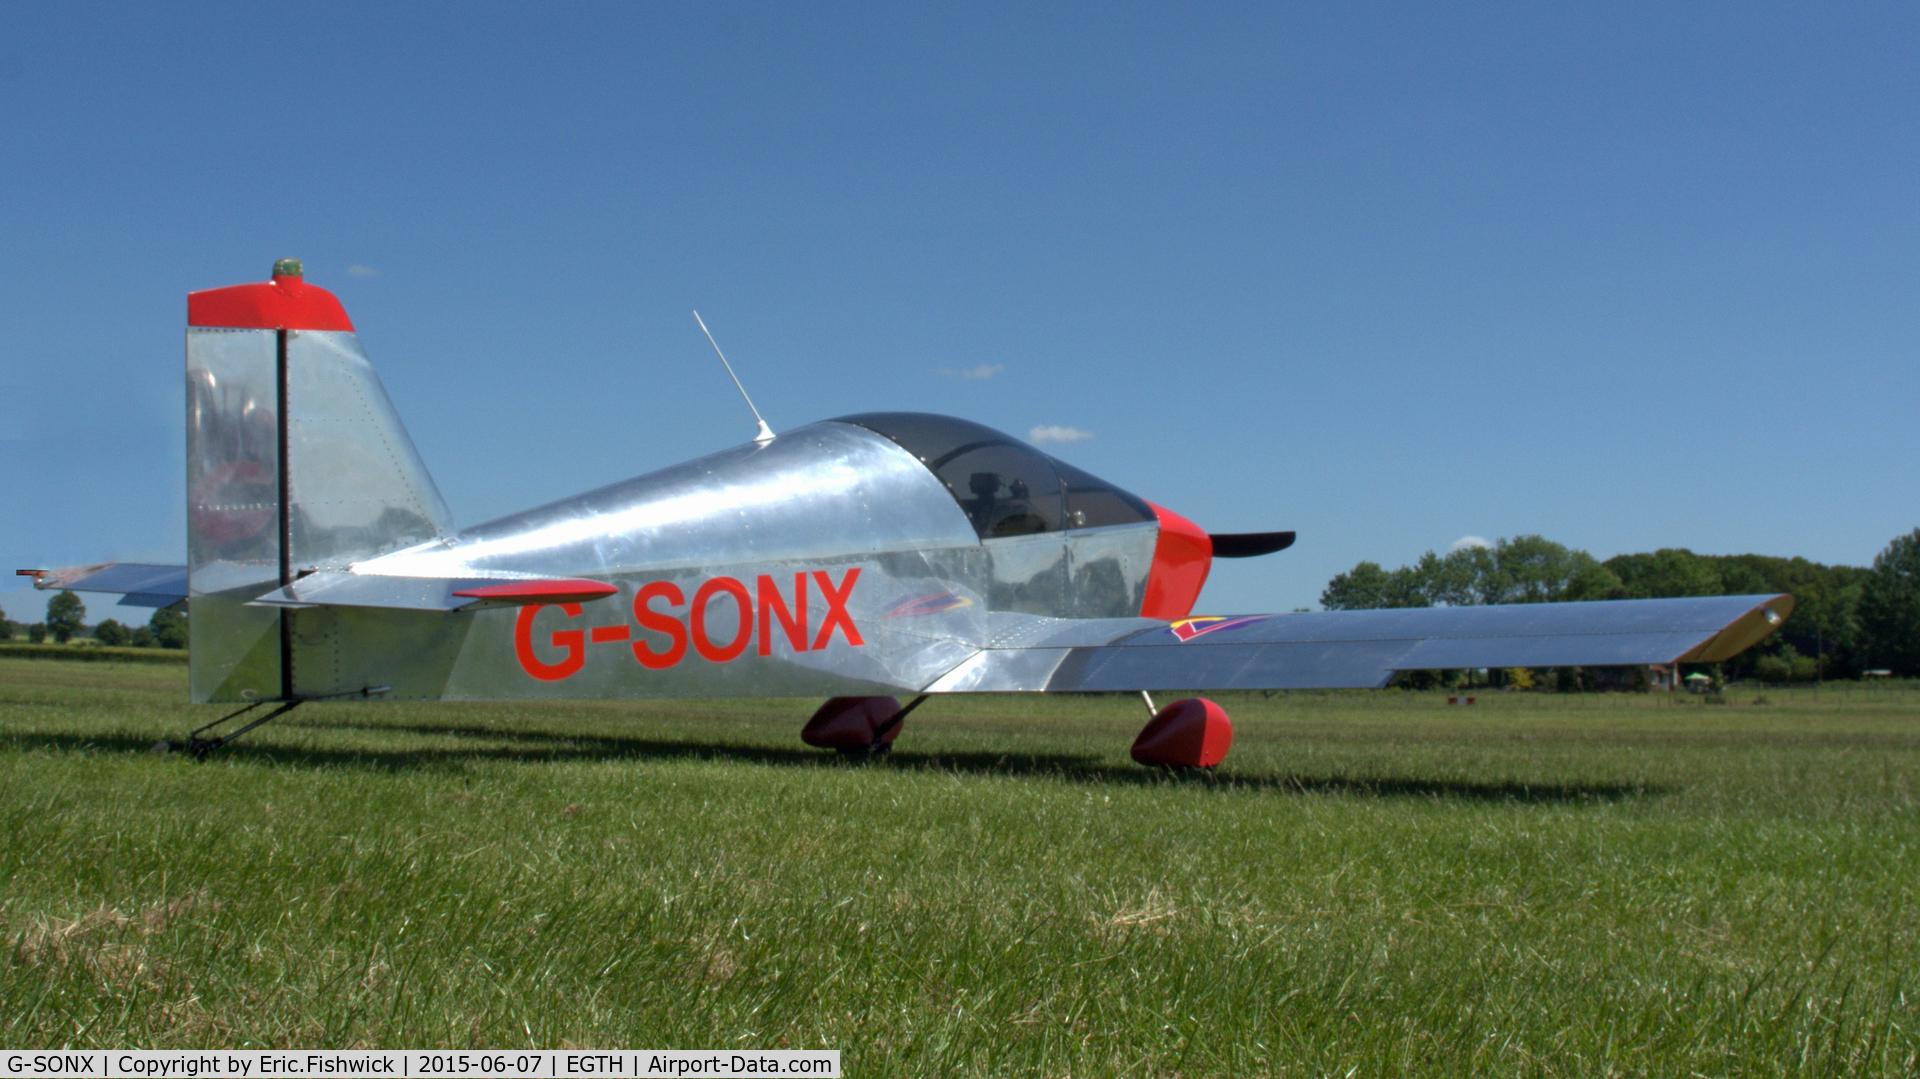 G-SONX, 2010 Sonex Sonex C/N LAA 337-14776, 2. G-SONX at The Shuttleworth Flying Day and LAA Party in the Park, June 2015.